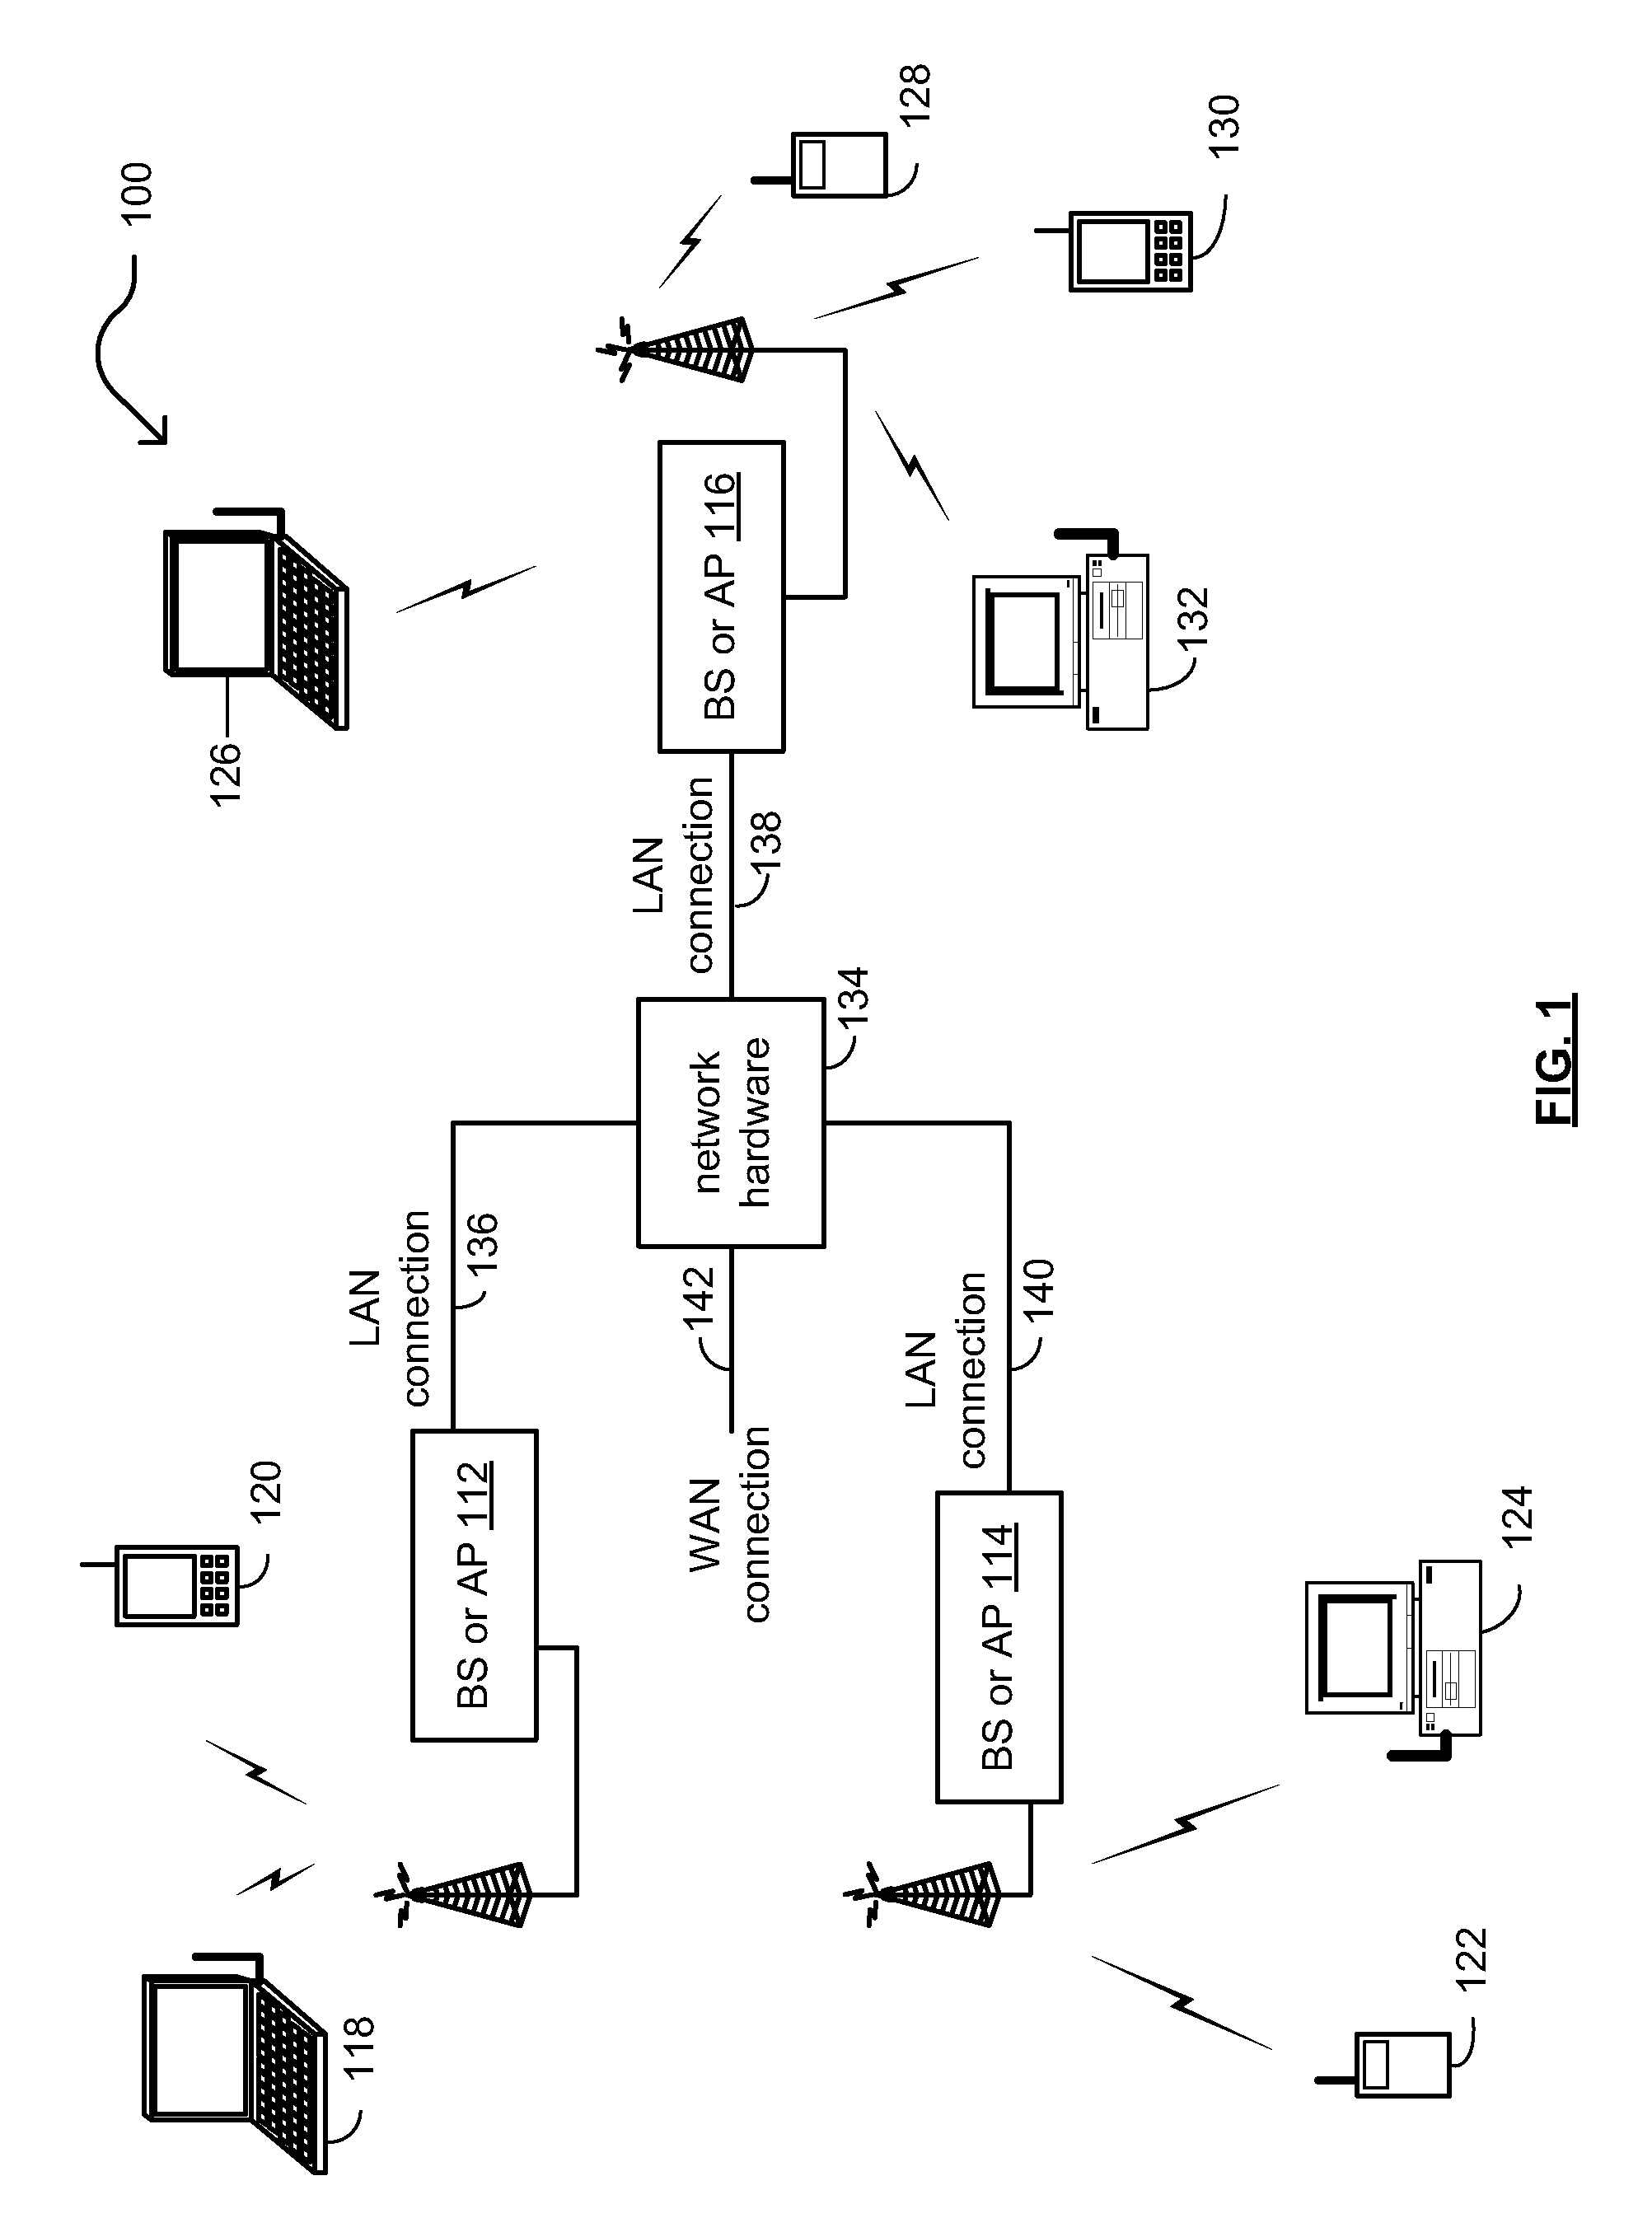 Multiple delivery traffic indication map (DTIM) per device within single user, multiple user, multiple access, and/or MIMO wireless communications